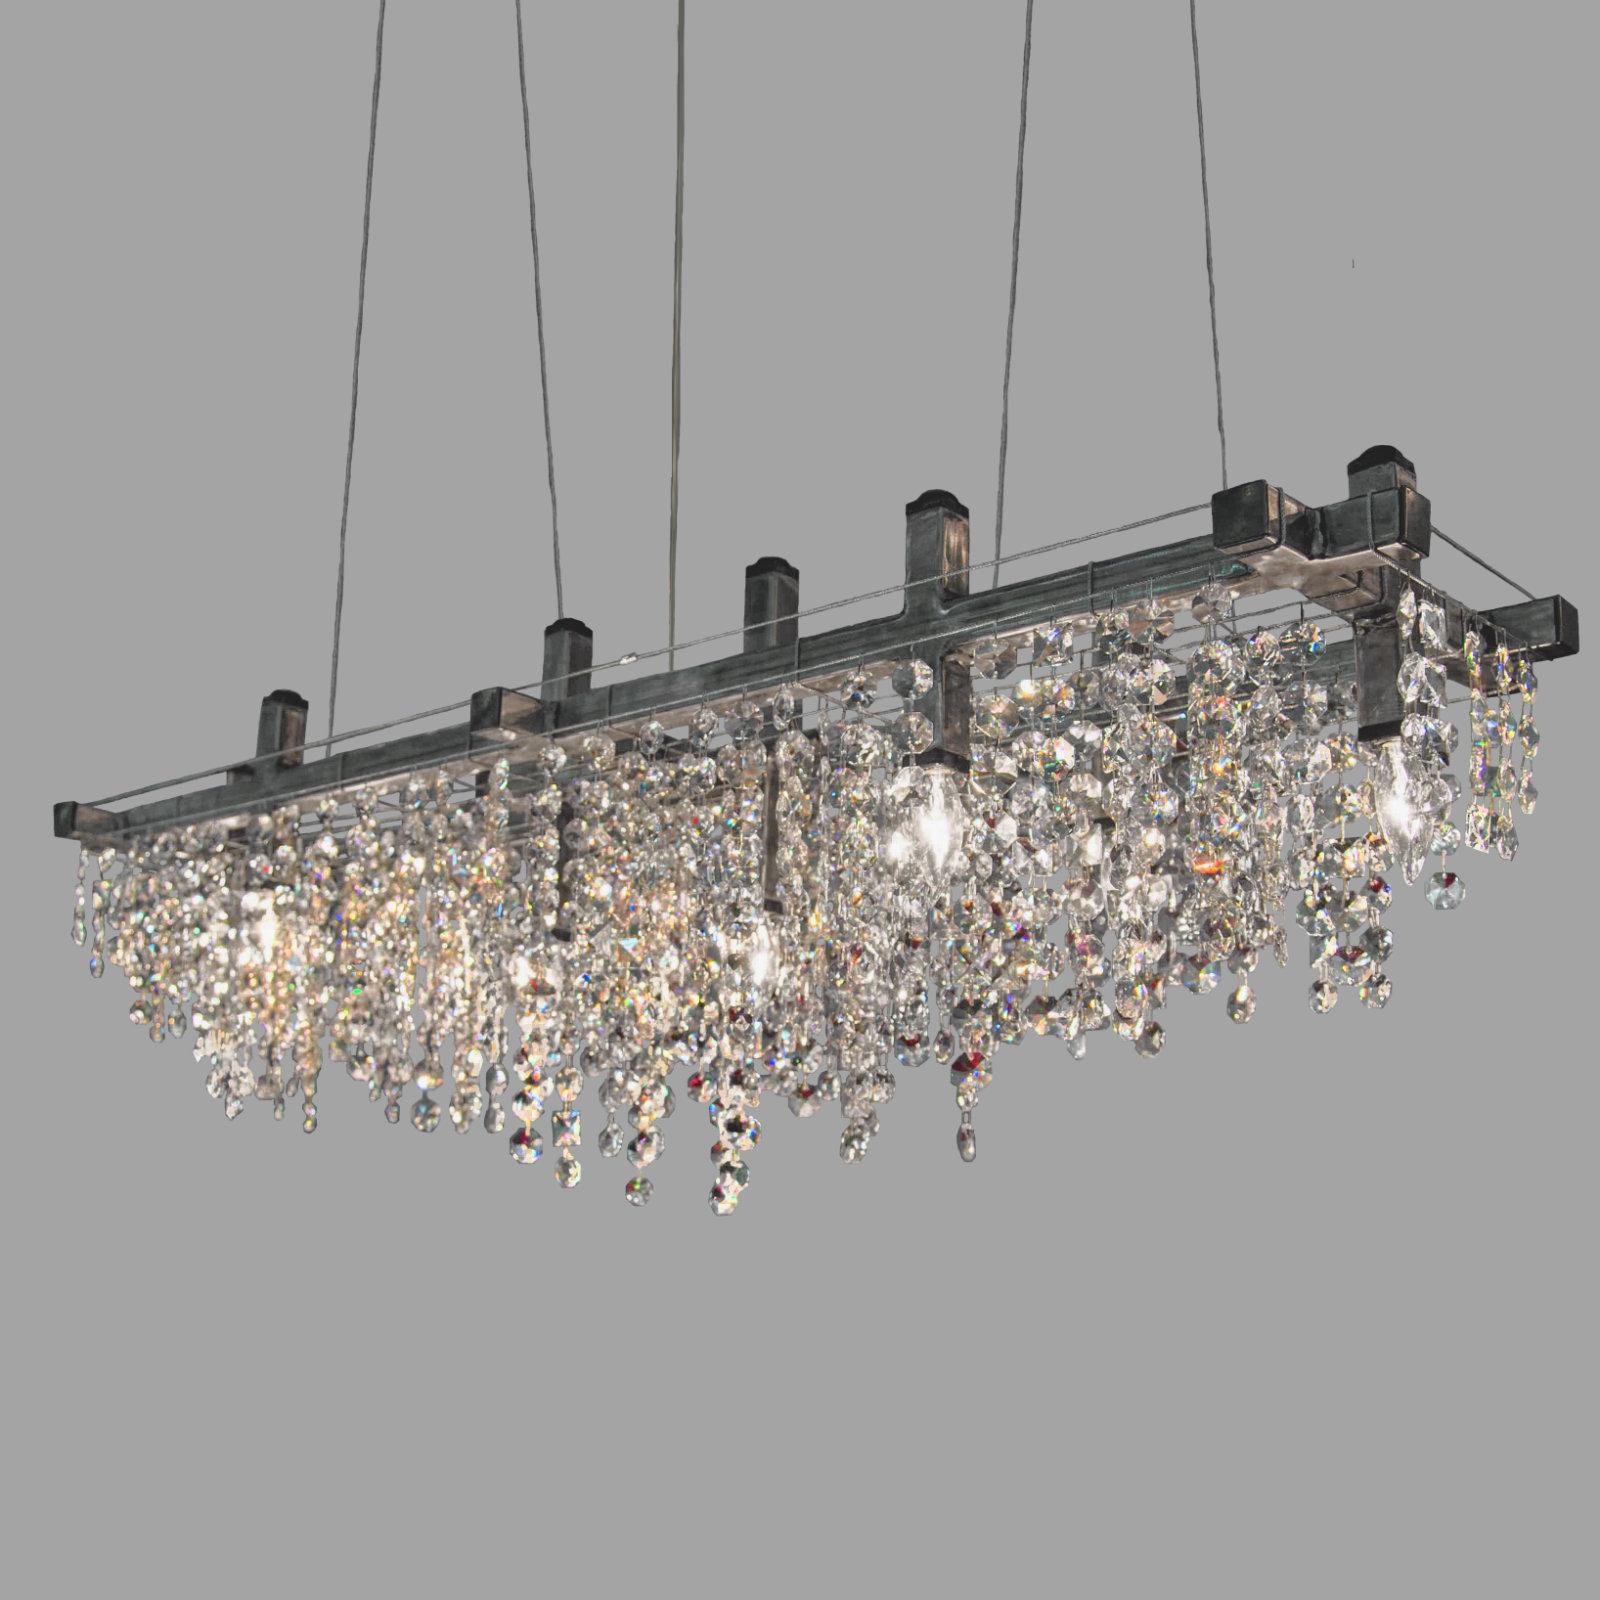 Matrix crystal linear suspension chandelier by Michael McHale.
Dimensions: D 23 x W 107 x H 45.5 cm.
Materials: steel, optically-pure gem-cut crystal.

8 x candelabra base CA7 bulb, either incandescent or LED

All our lamps can be wired